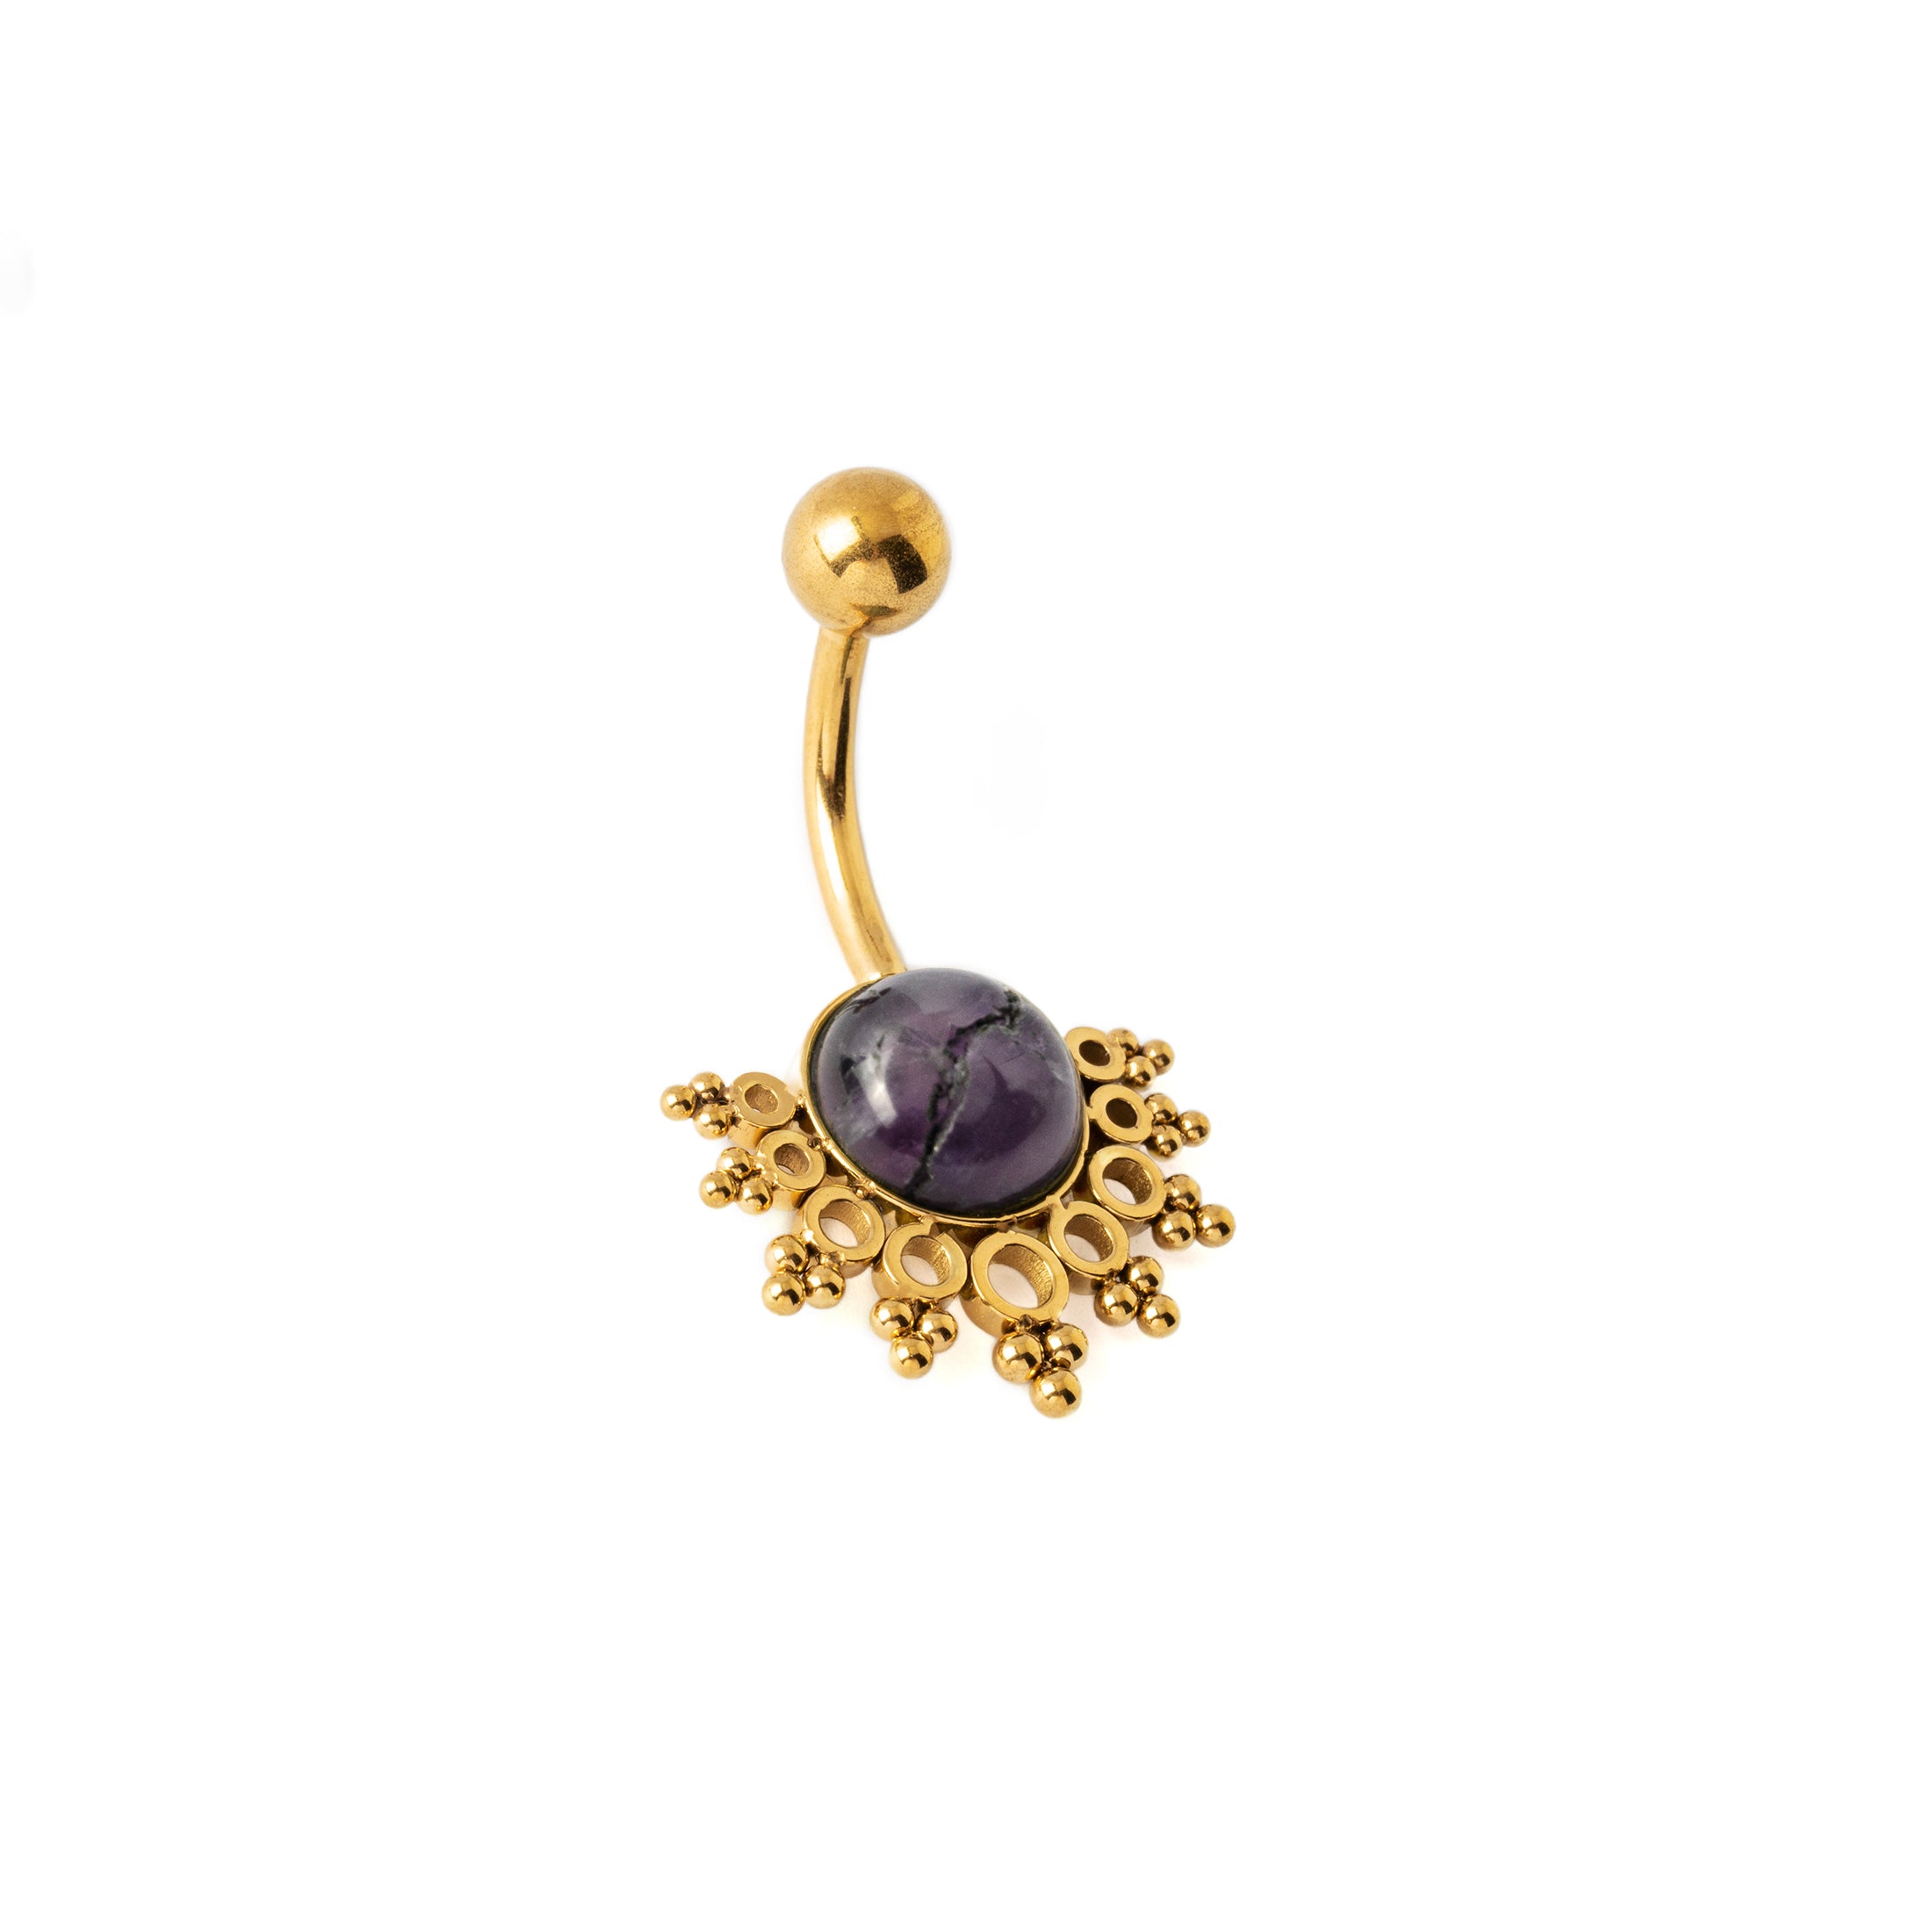 Tarita golden surgical steel belly bar with Amethyst left side view